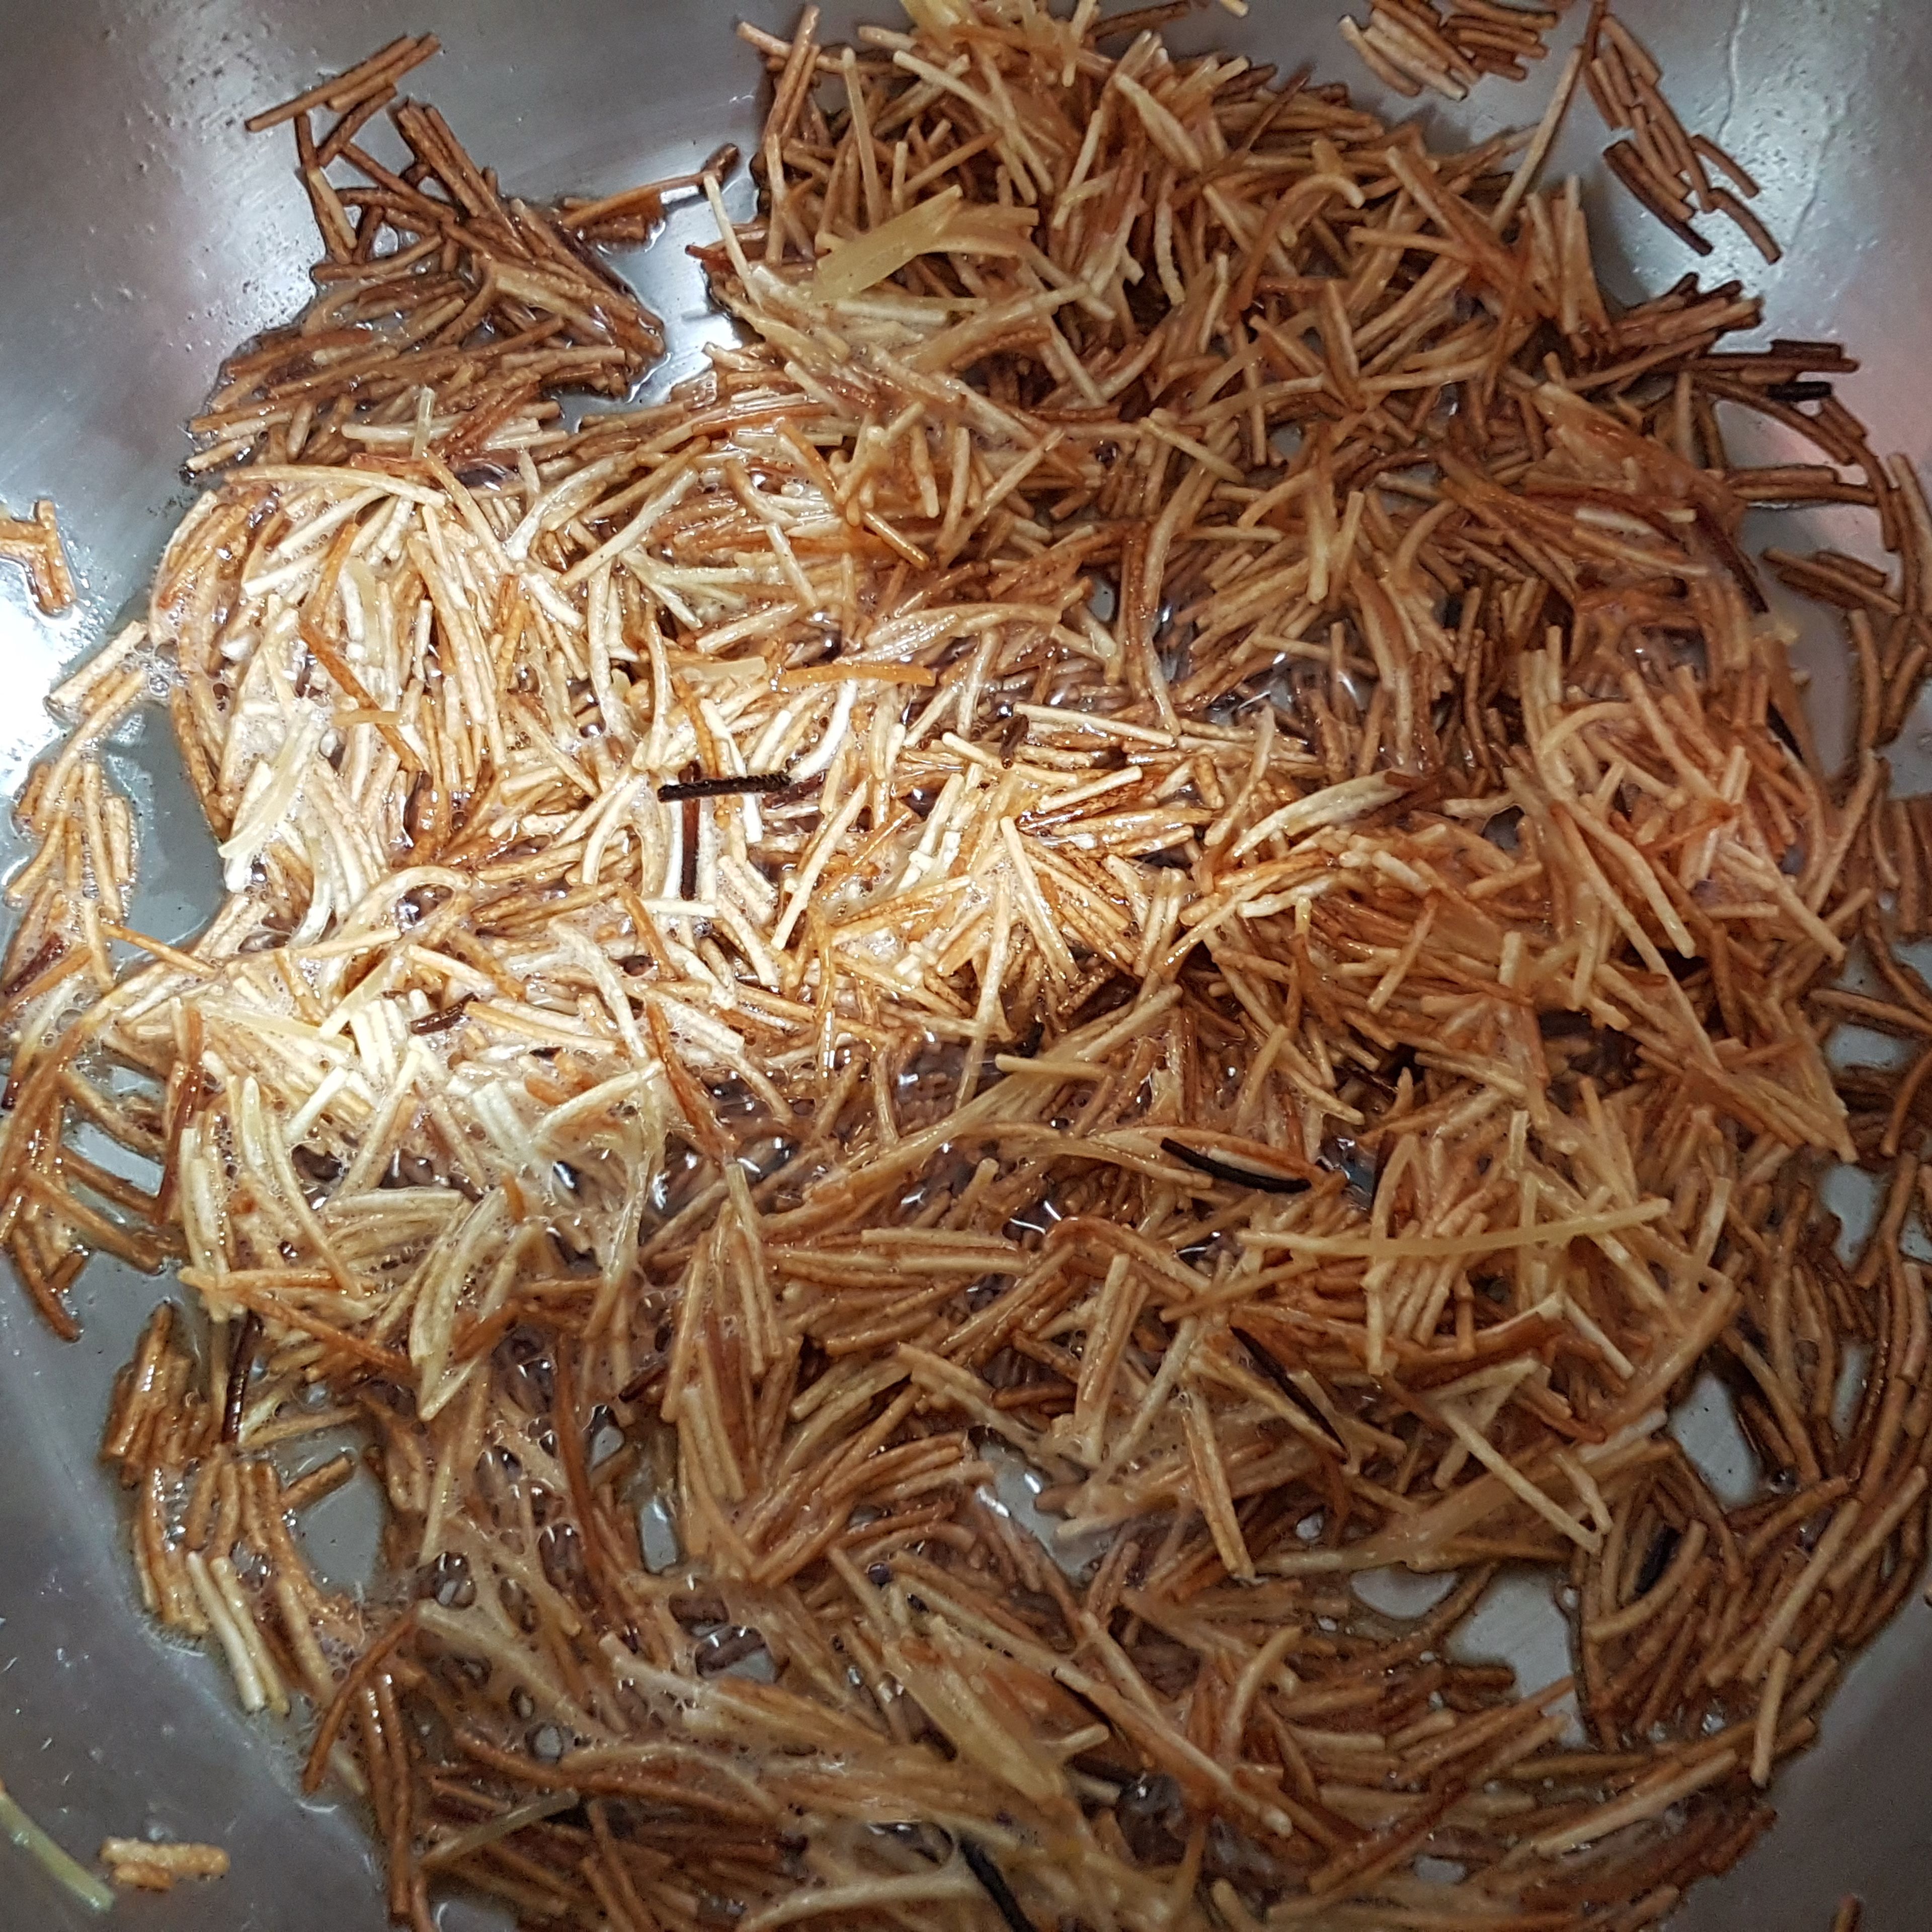 To prepare the rice. Fry the vermicelli with butter until golden brown.